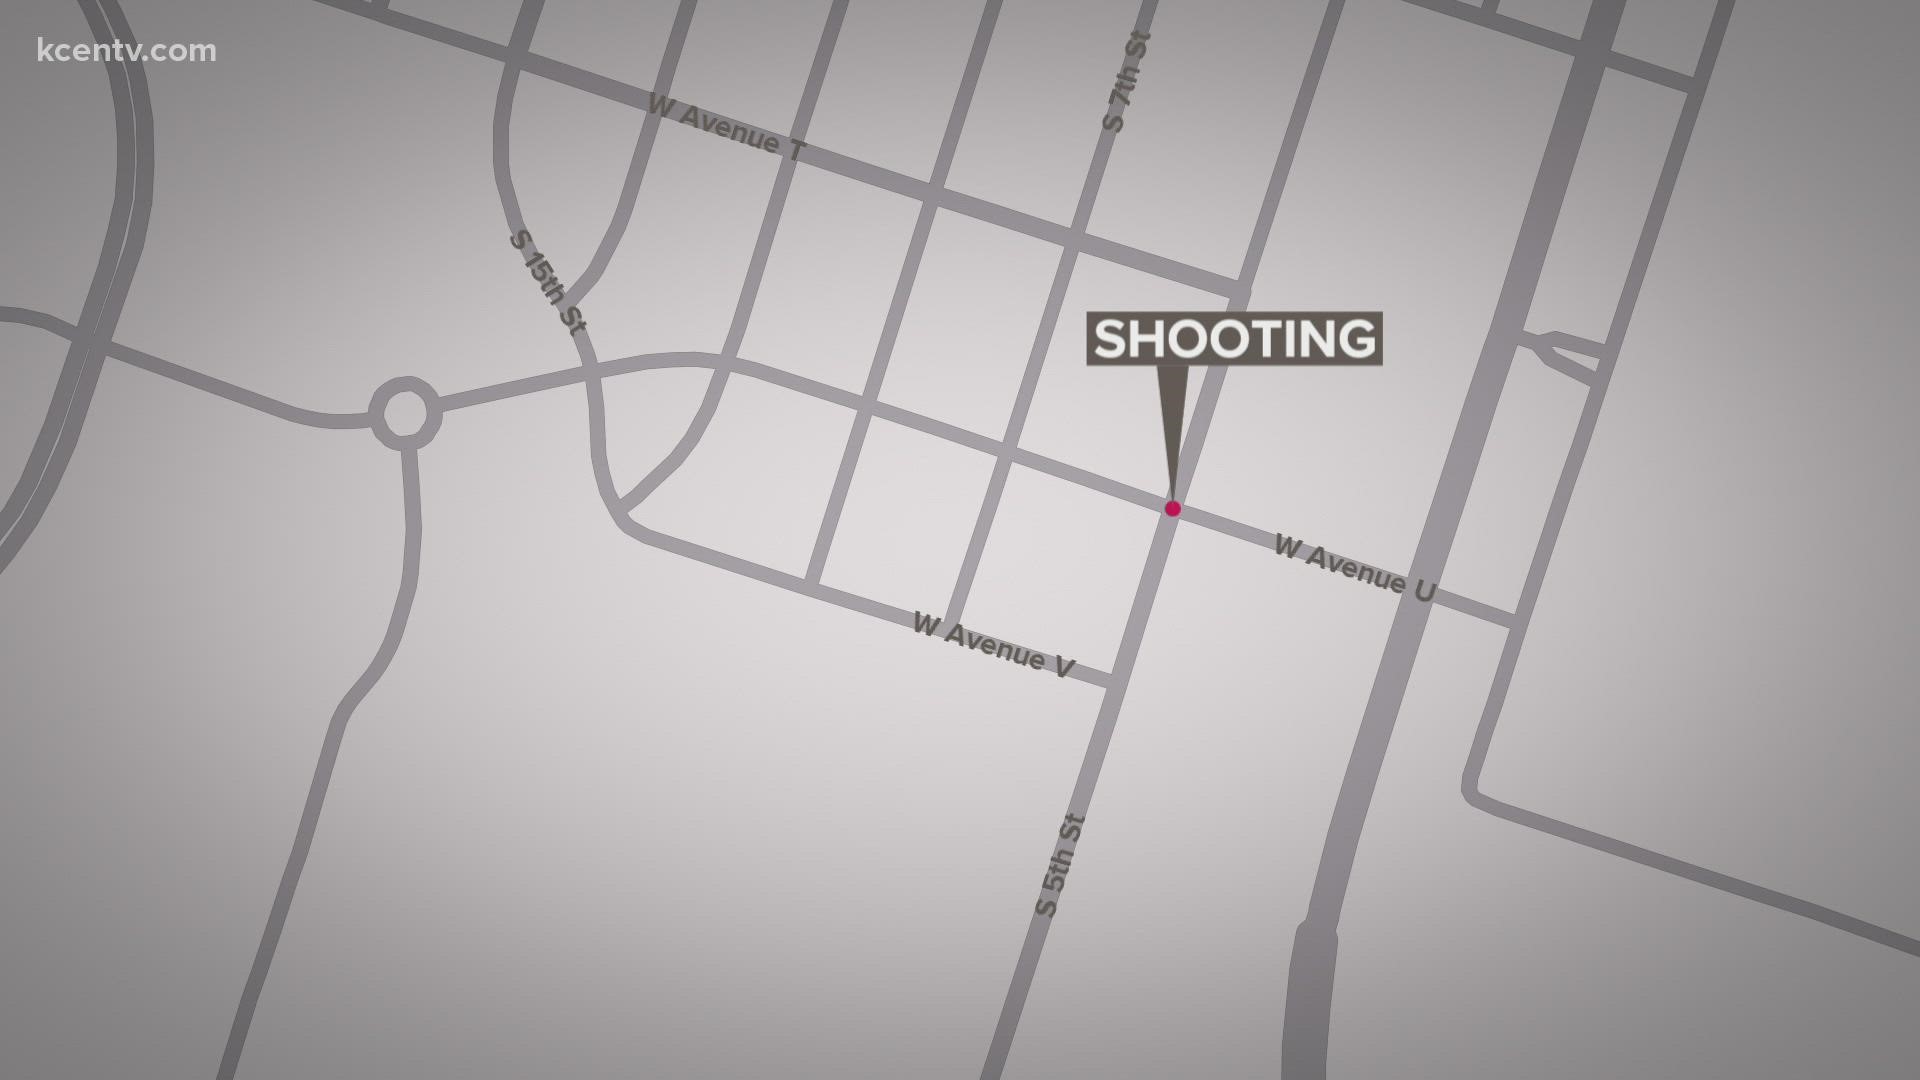 Police said they were called around 12:45 a.m. about a shooting in the area of South 5th Street and West Avenue U.